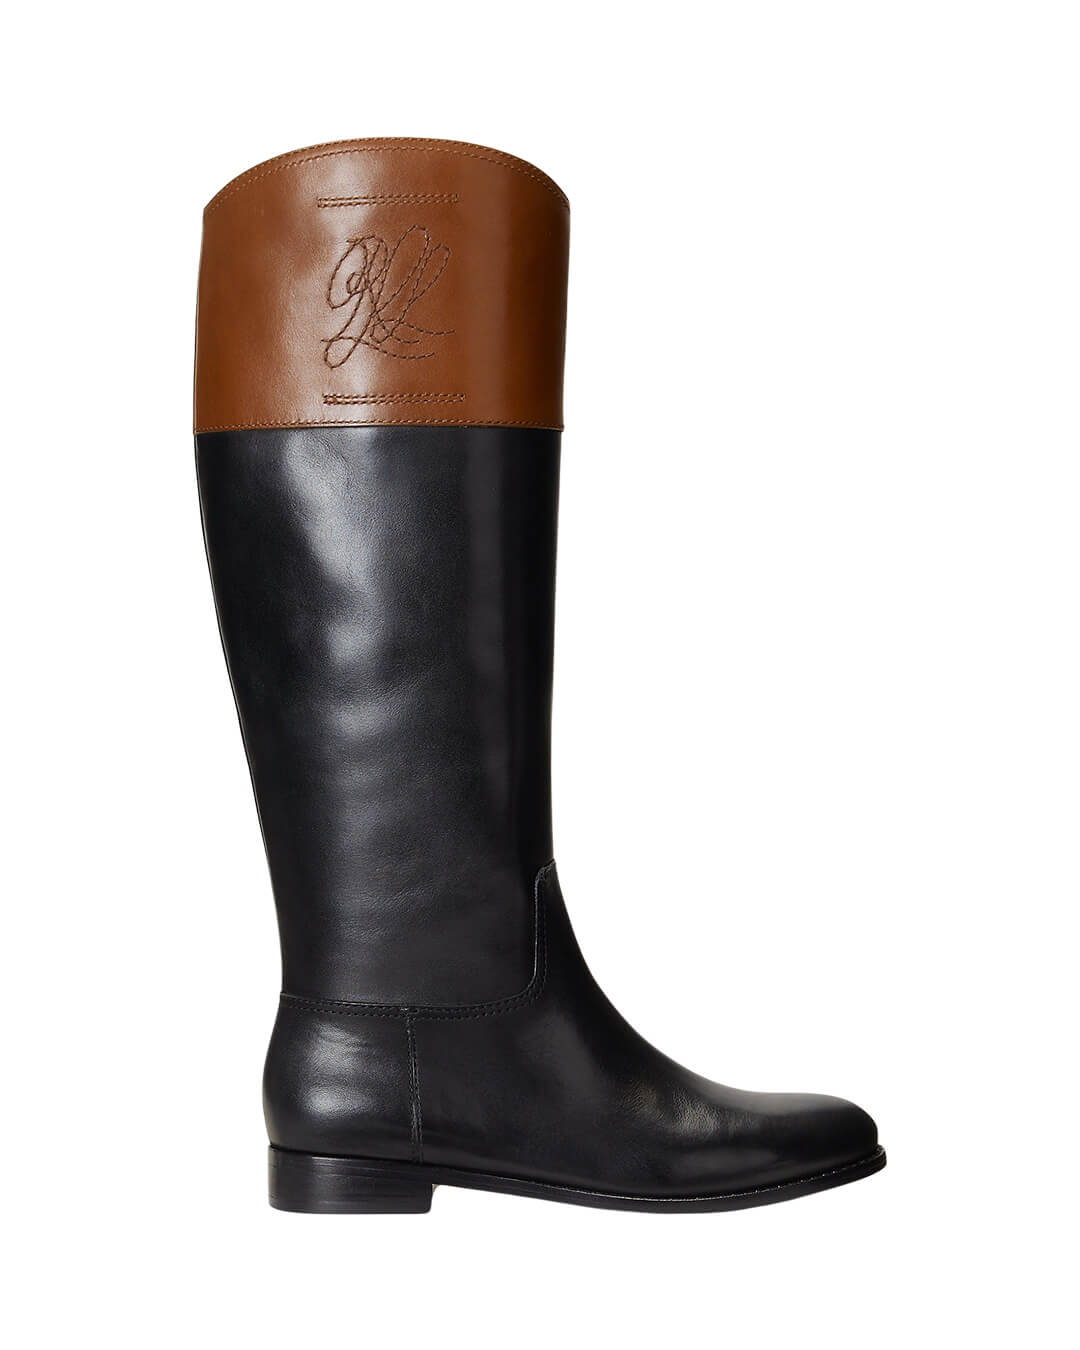 Lauren By Ralph Lauren Shoes JUSTINE-BOOTS-TALL BOOT BLACK/DEEP SADDLE TANAW23